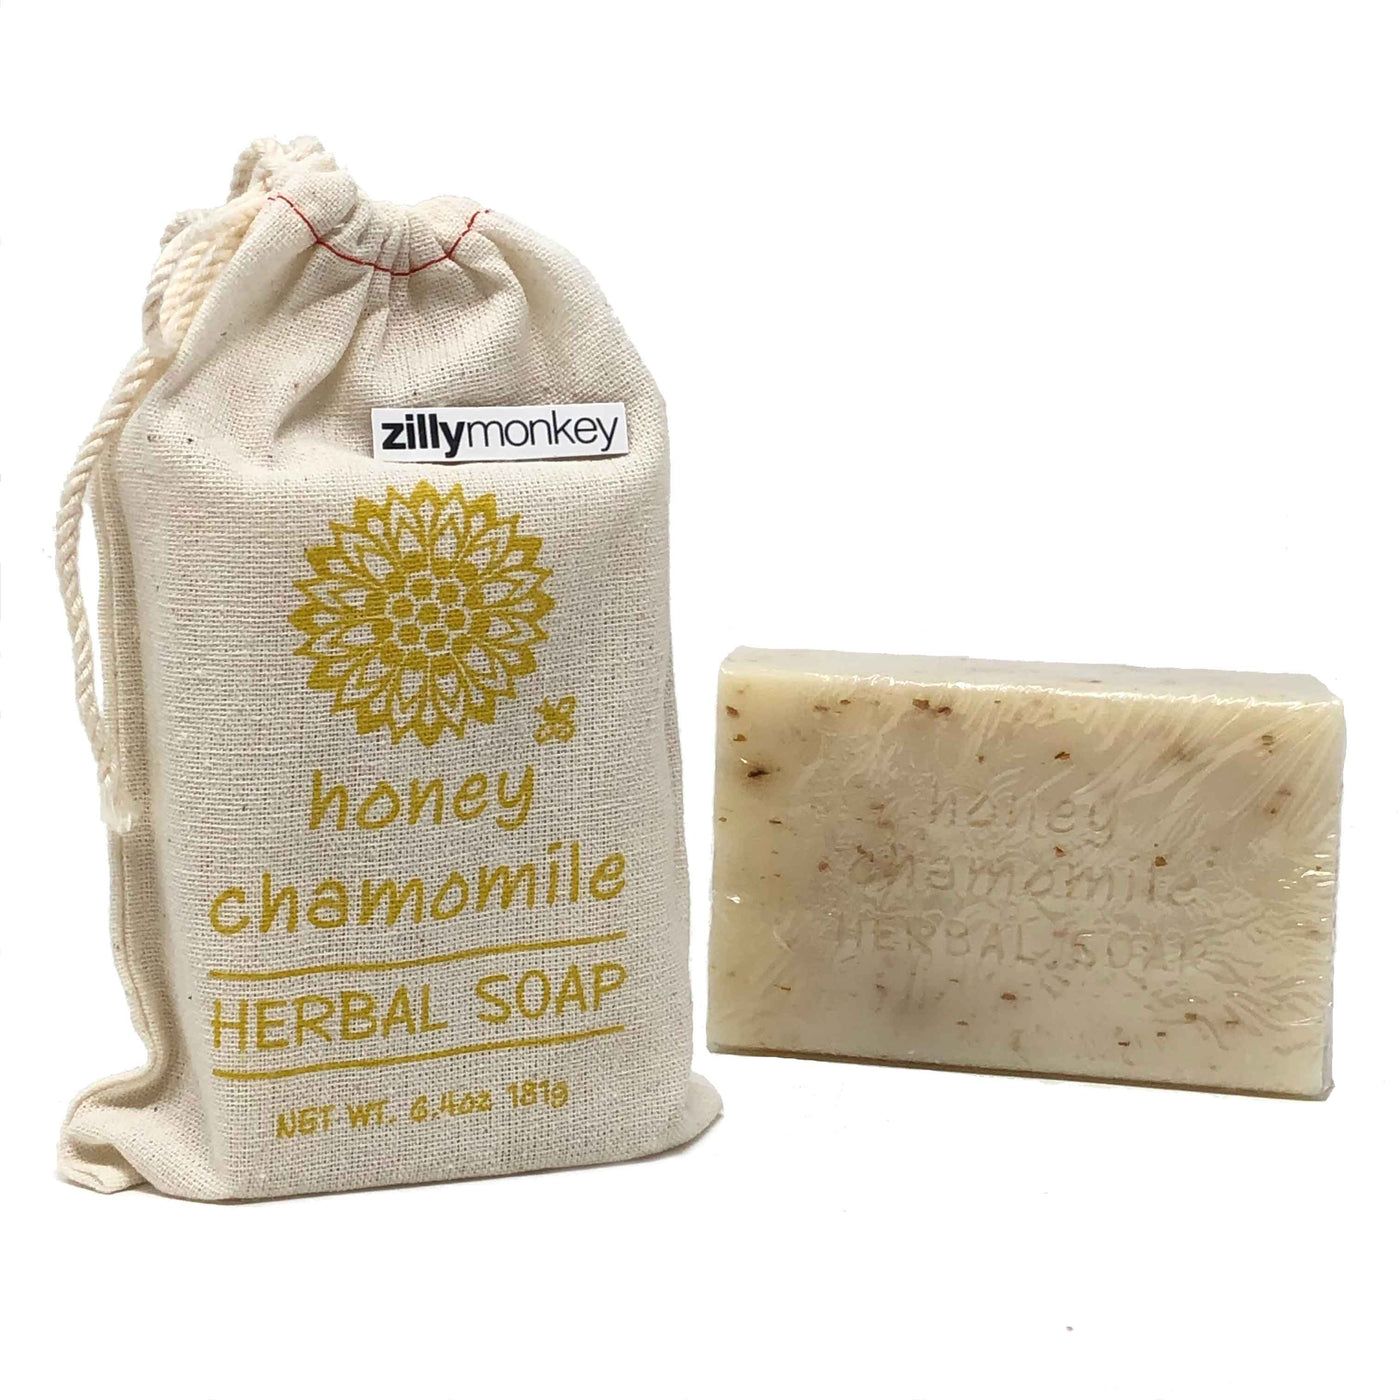 Honey Chamomile Herbal Soap by Greenwich Bay Trading Company